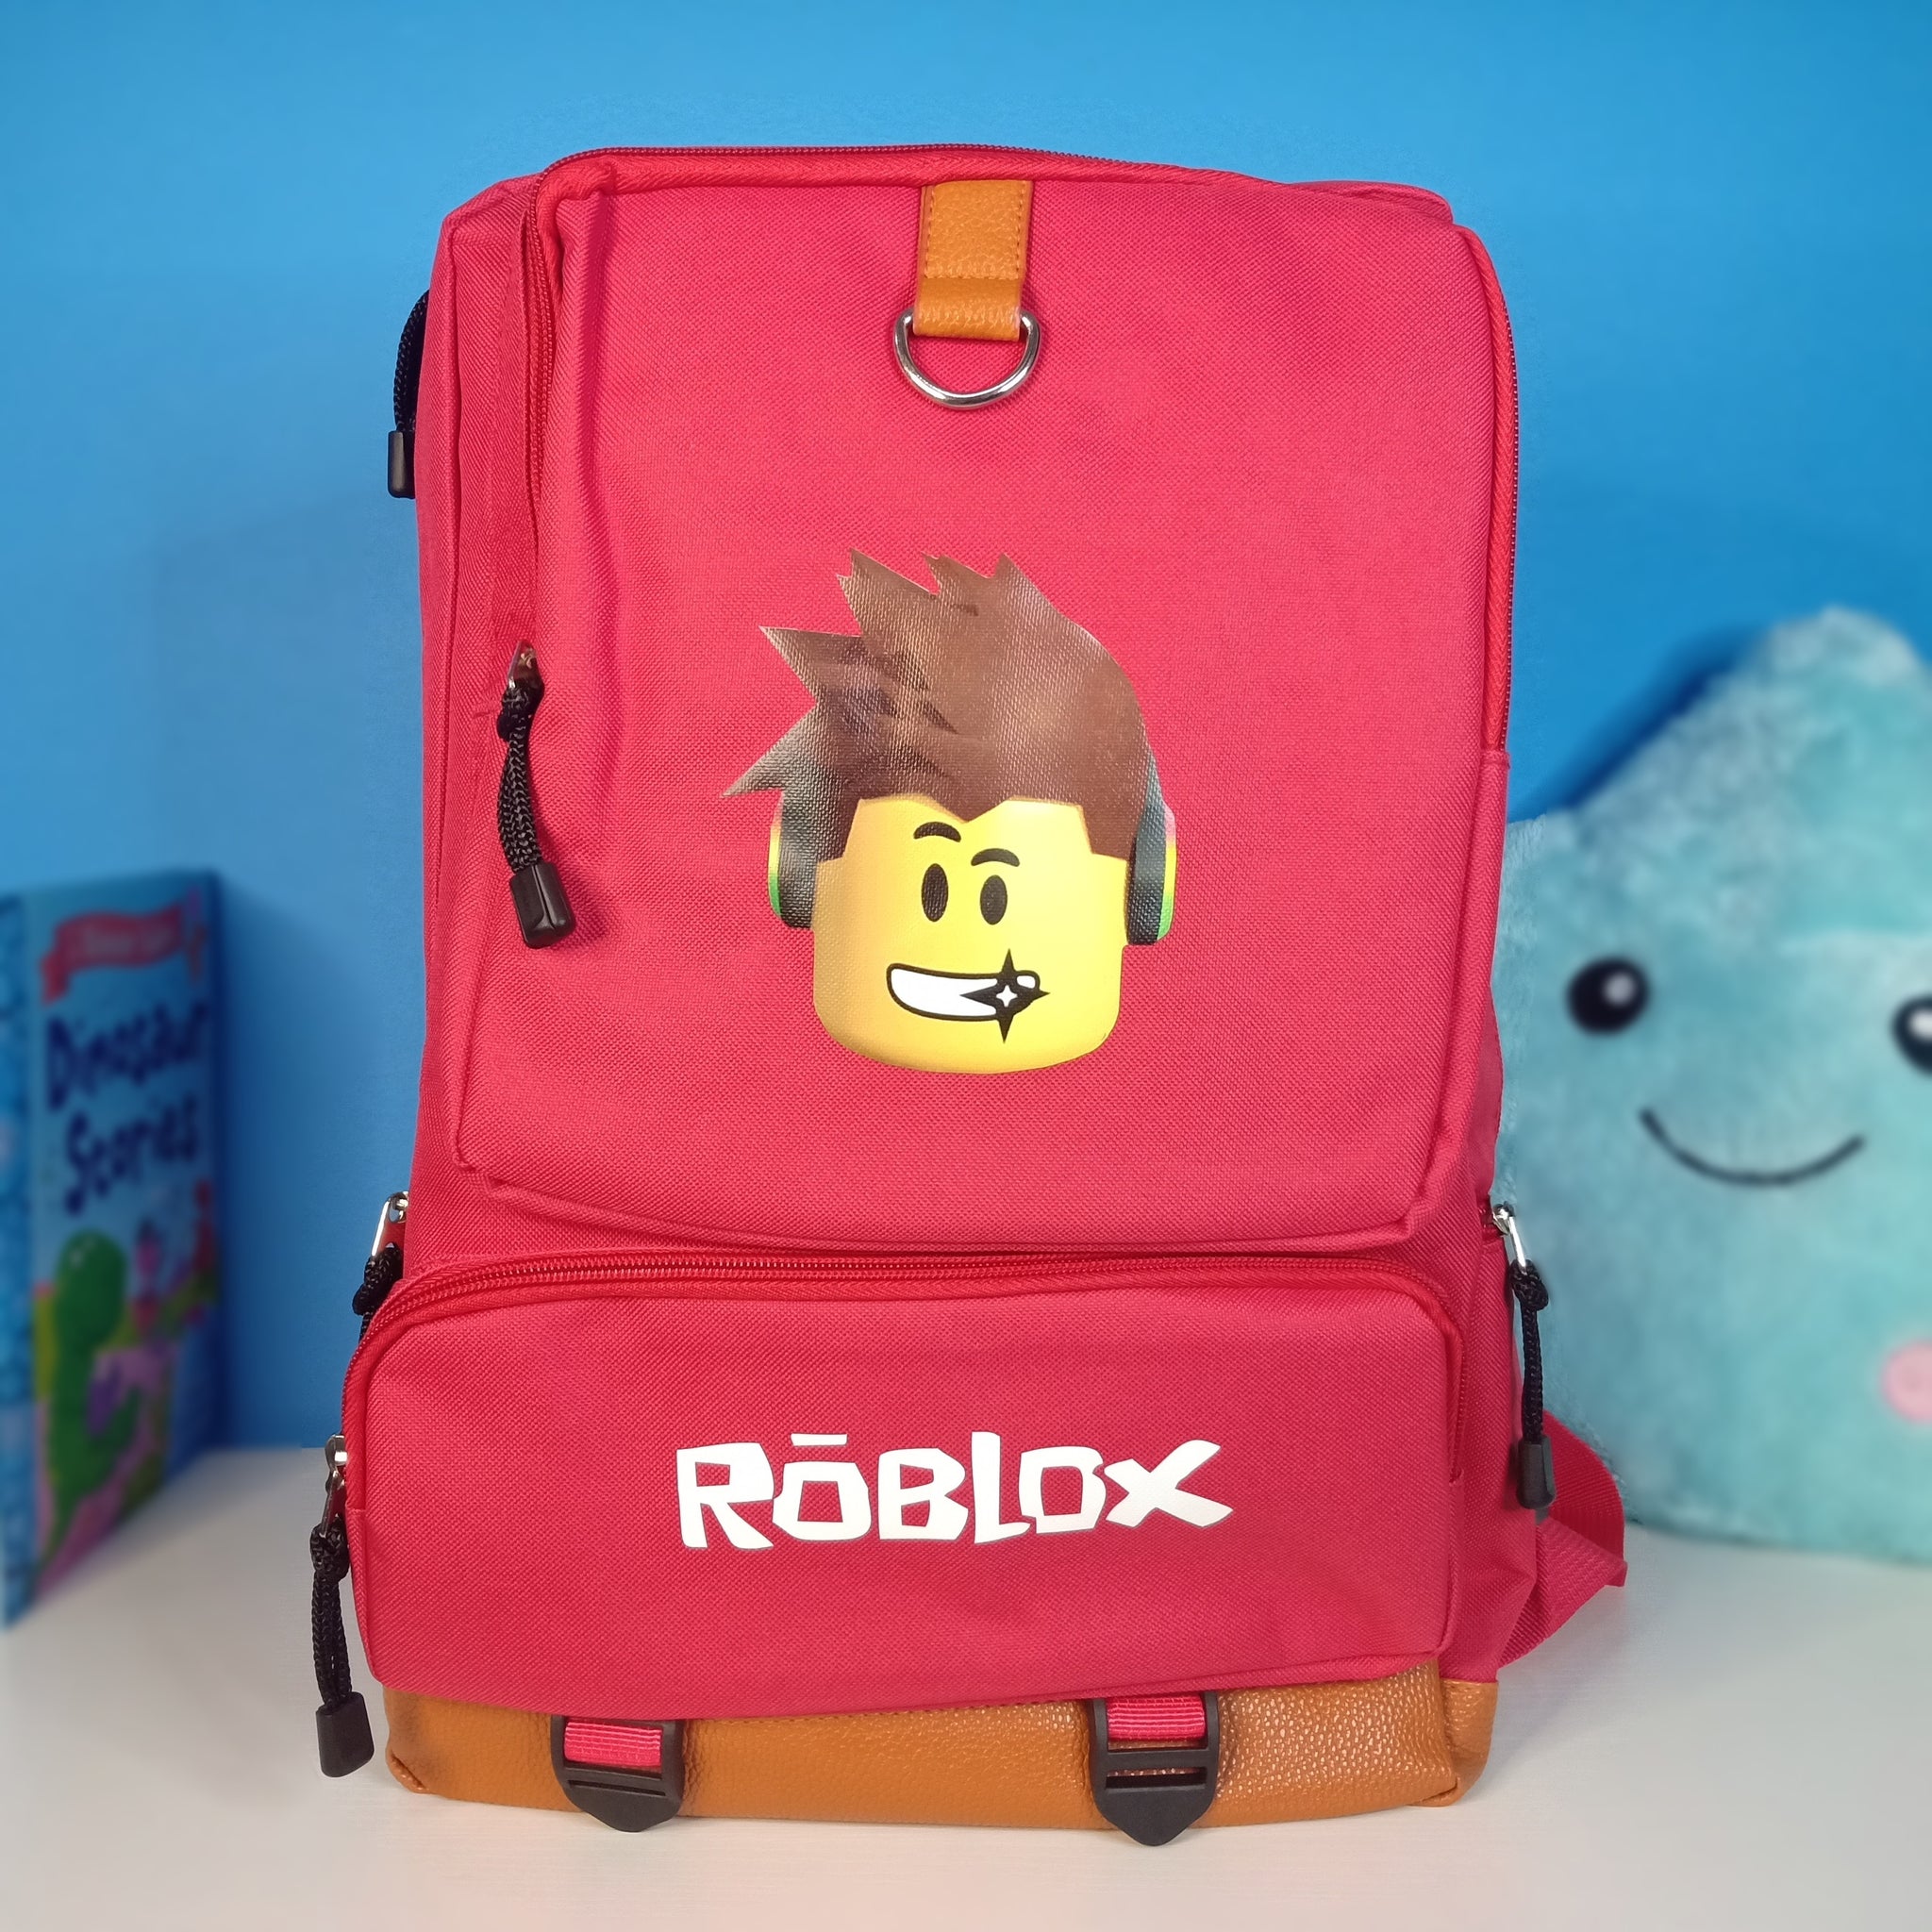 Roblox Toys For Sale Philippines